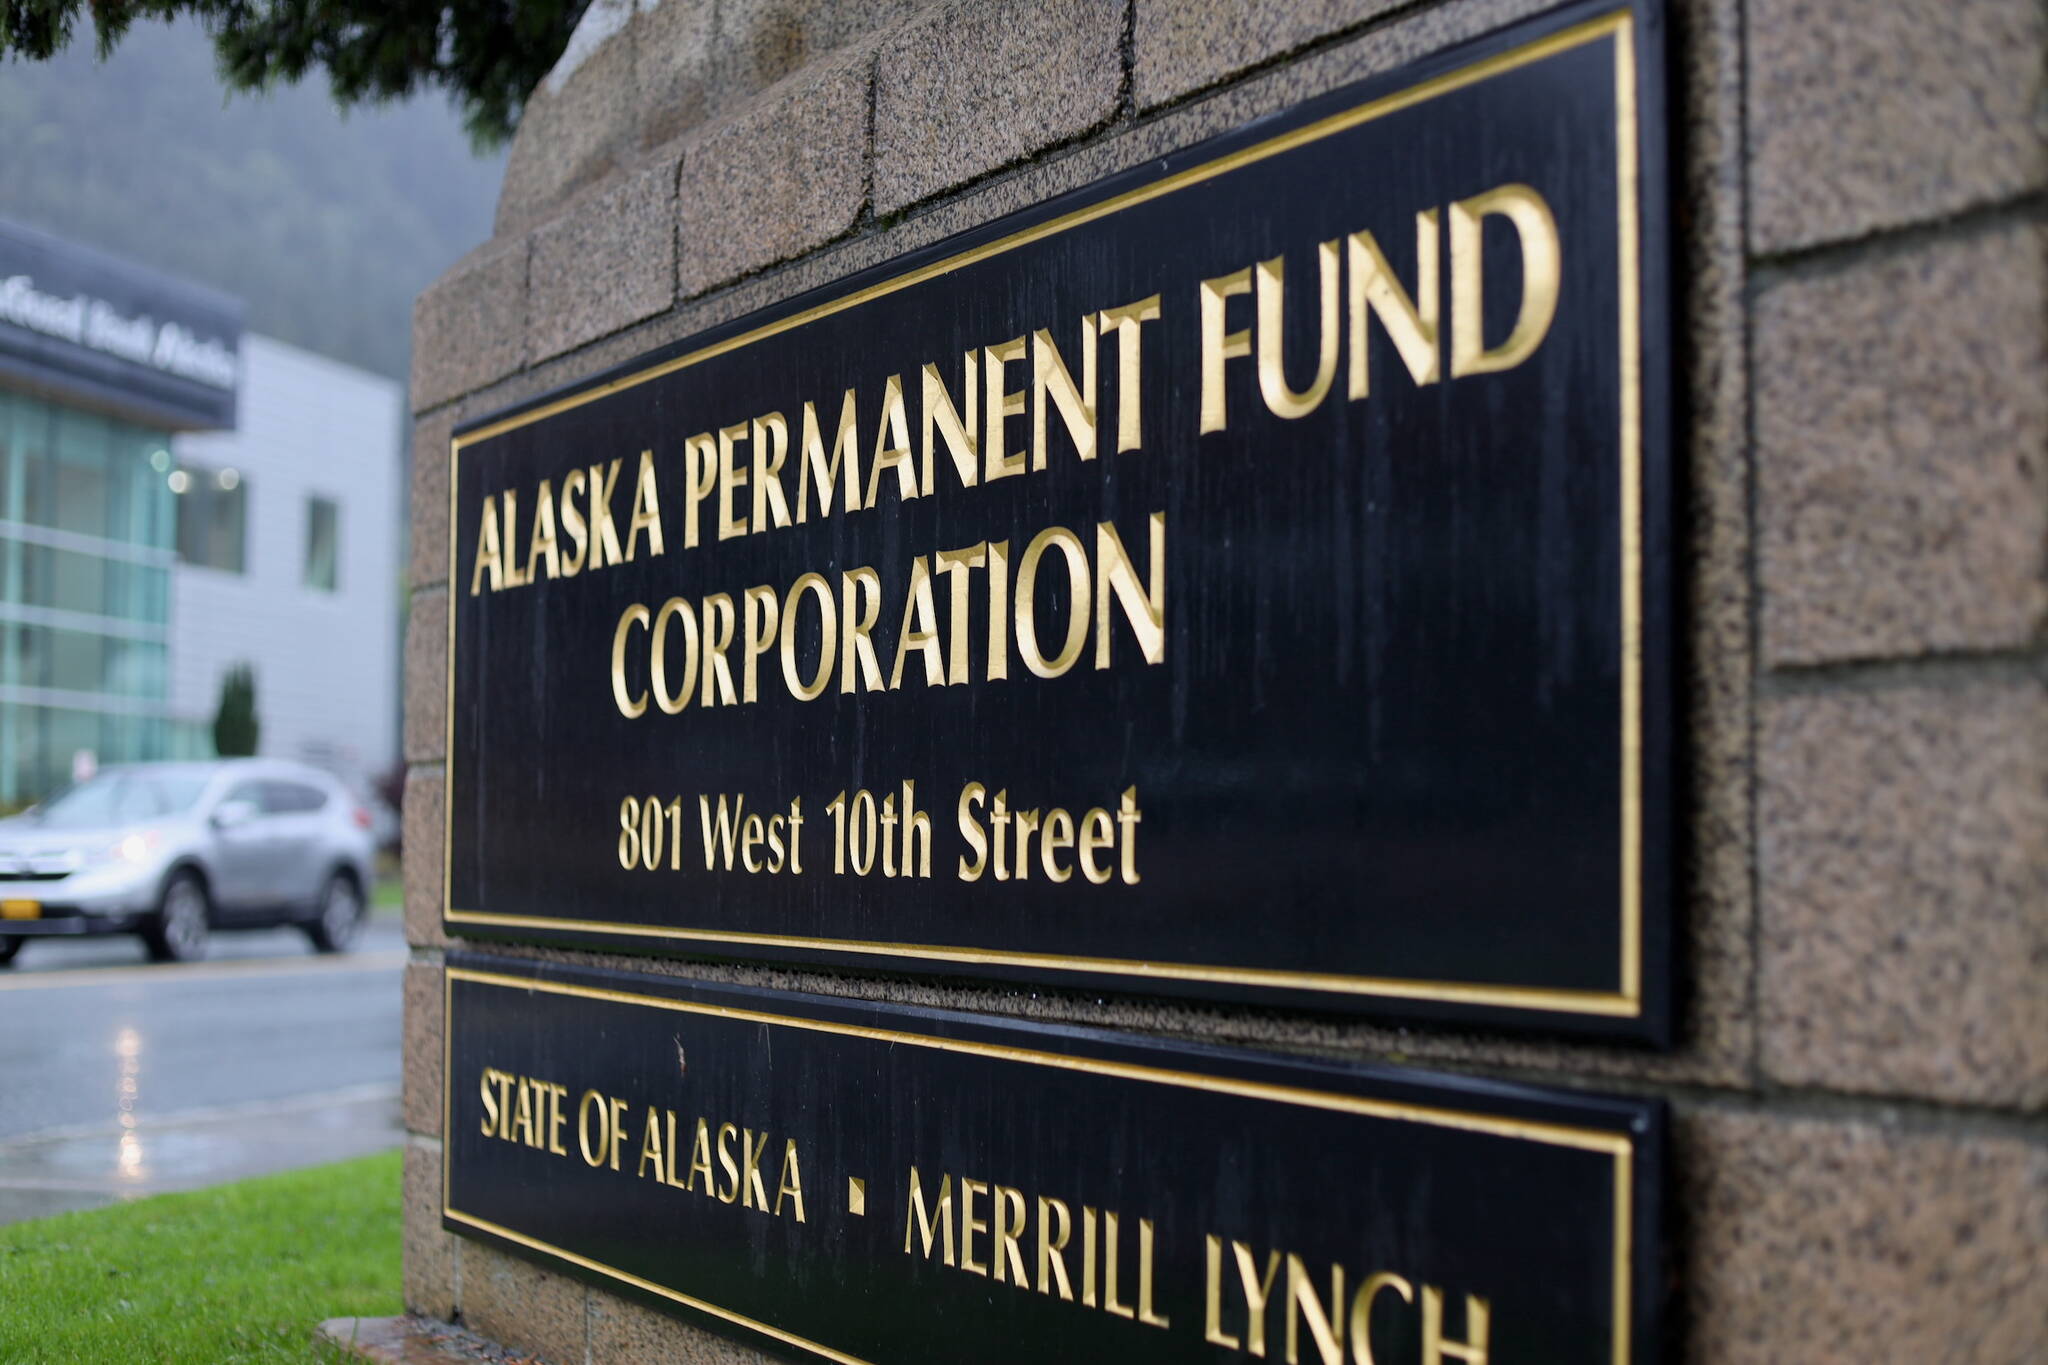 Cars drive past the Alaska Permanent Fund Corp. building in Juneau on Thursday. This year’s Permanent Fund dividend will be $1,312, the state Department of Revenue announced. (Clarise Larson / Juneau Empire)